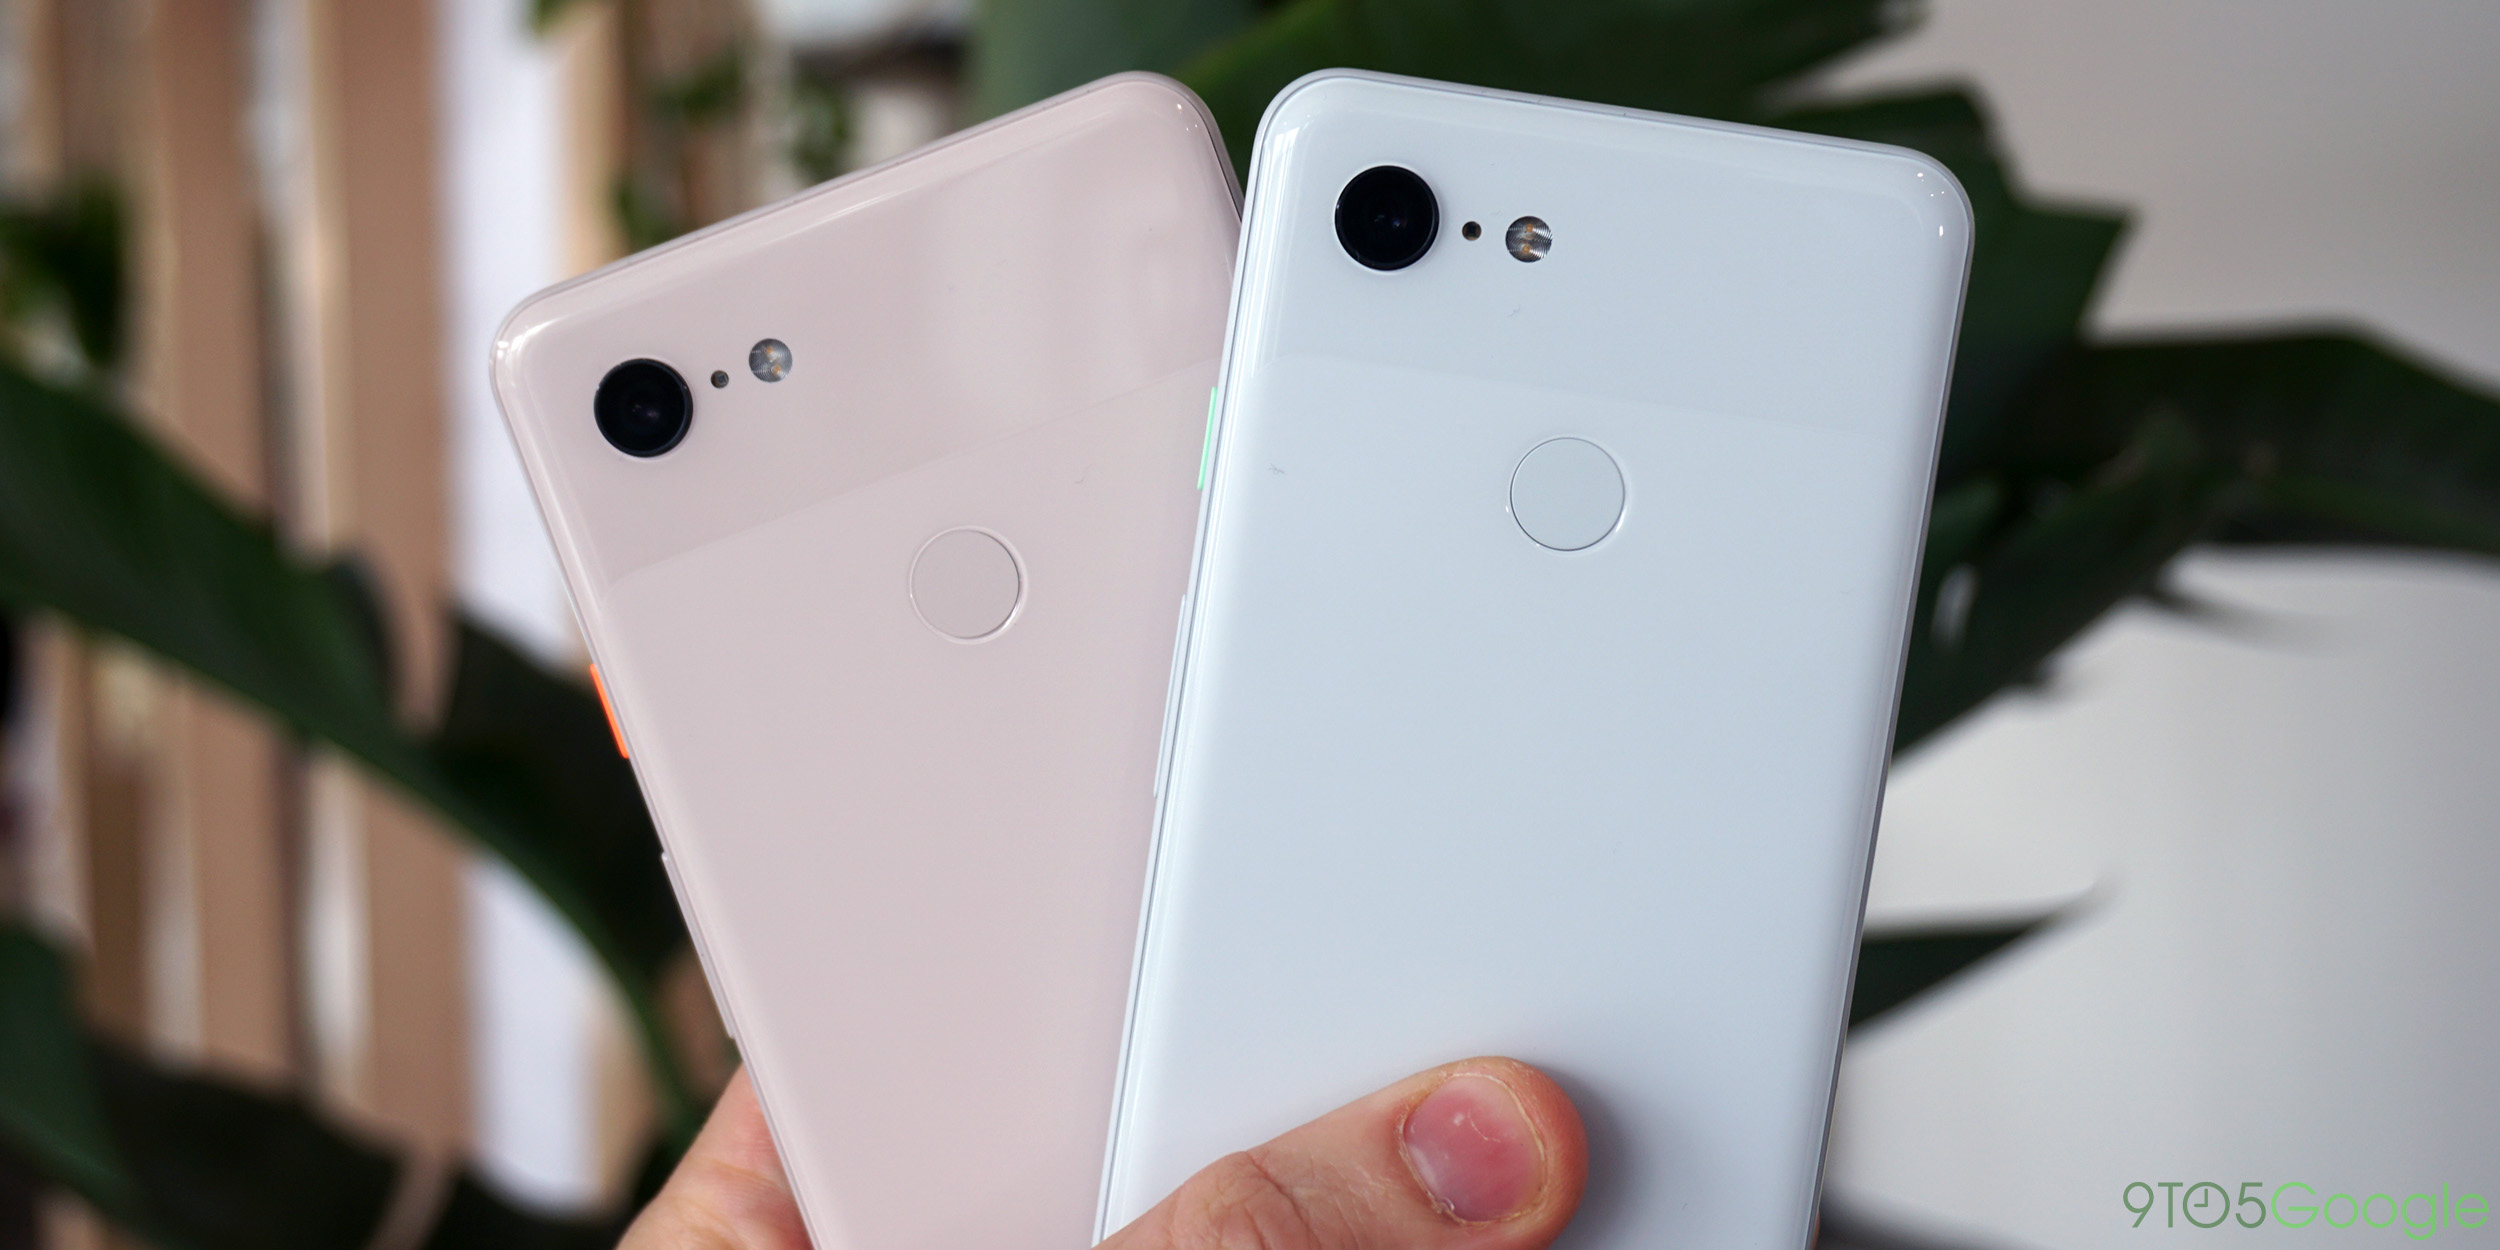 where can i buy a pixel 3 phone